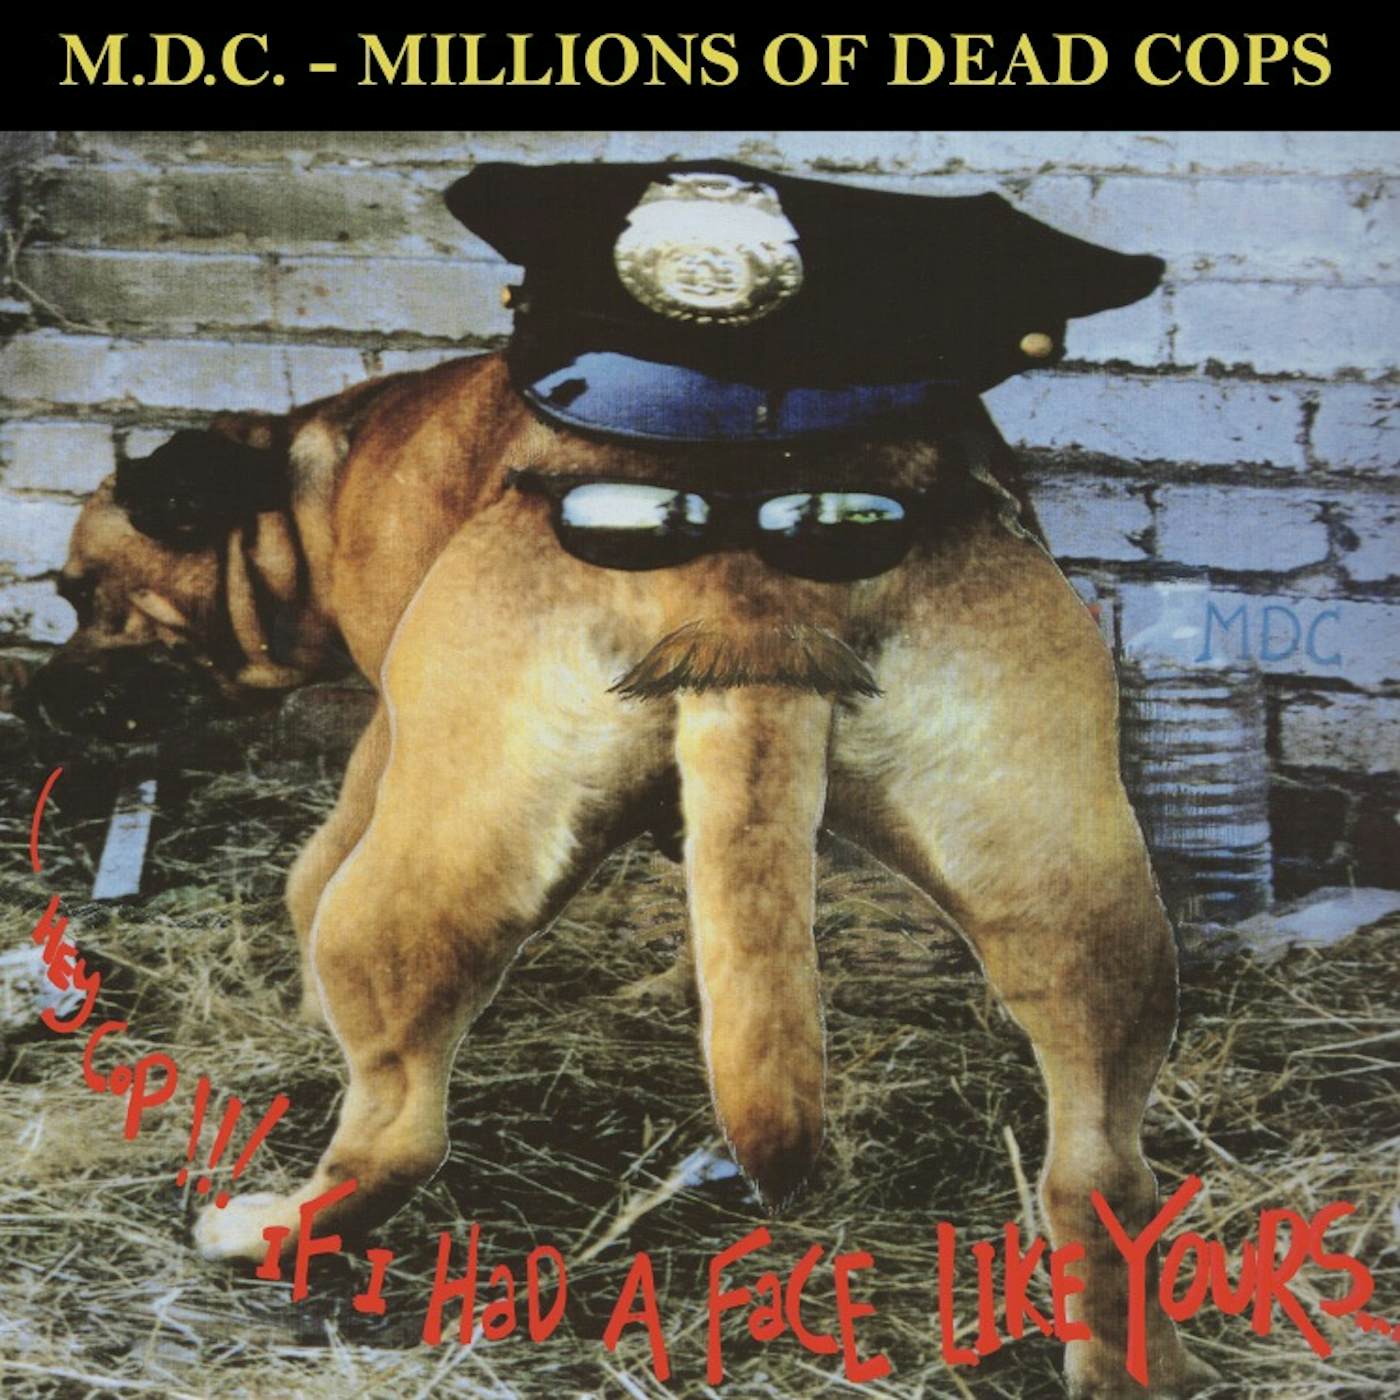 MDC HEY COP!!! IF I HAD A FACE LIKE YOURS Vinyl Record